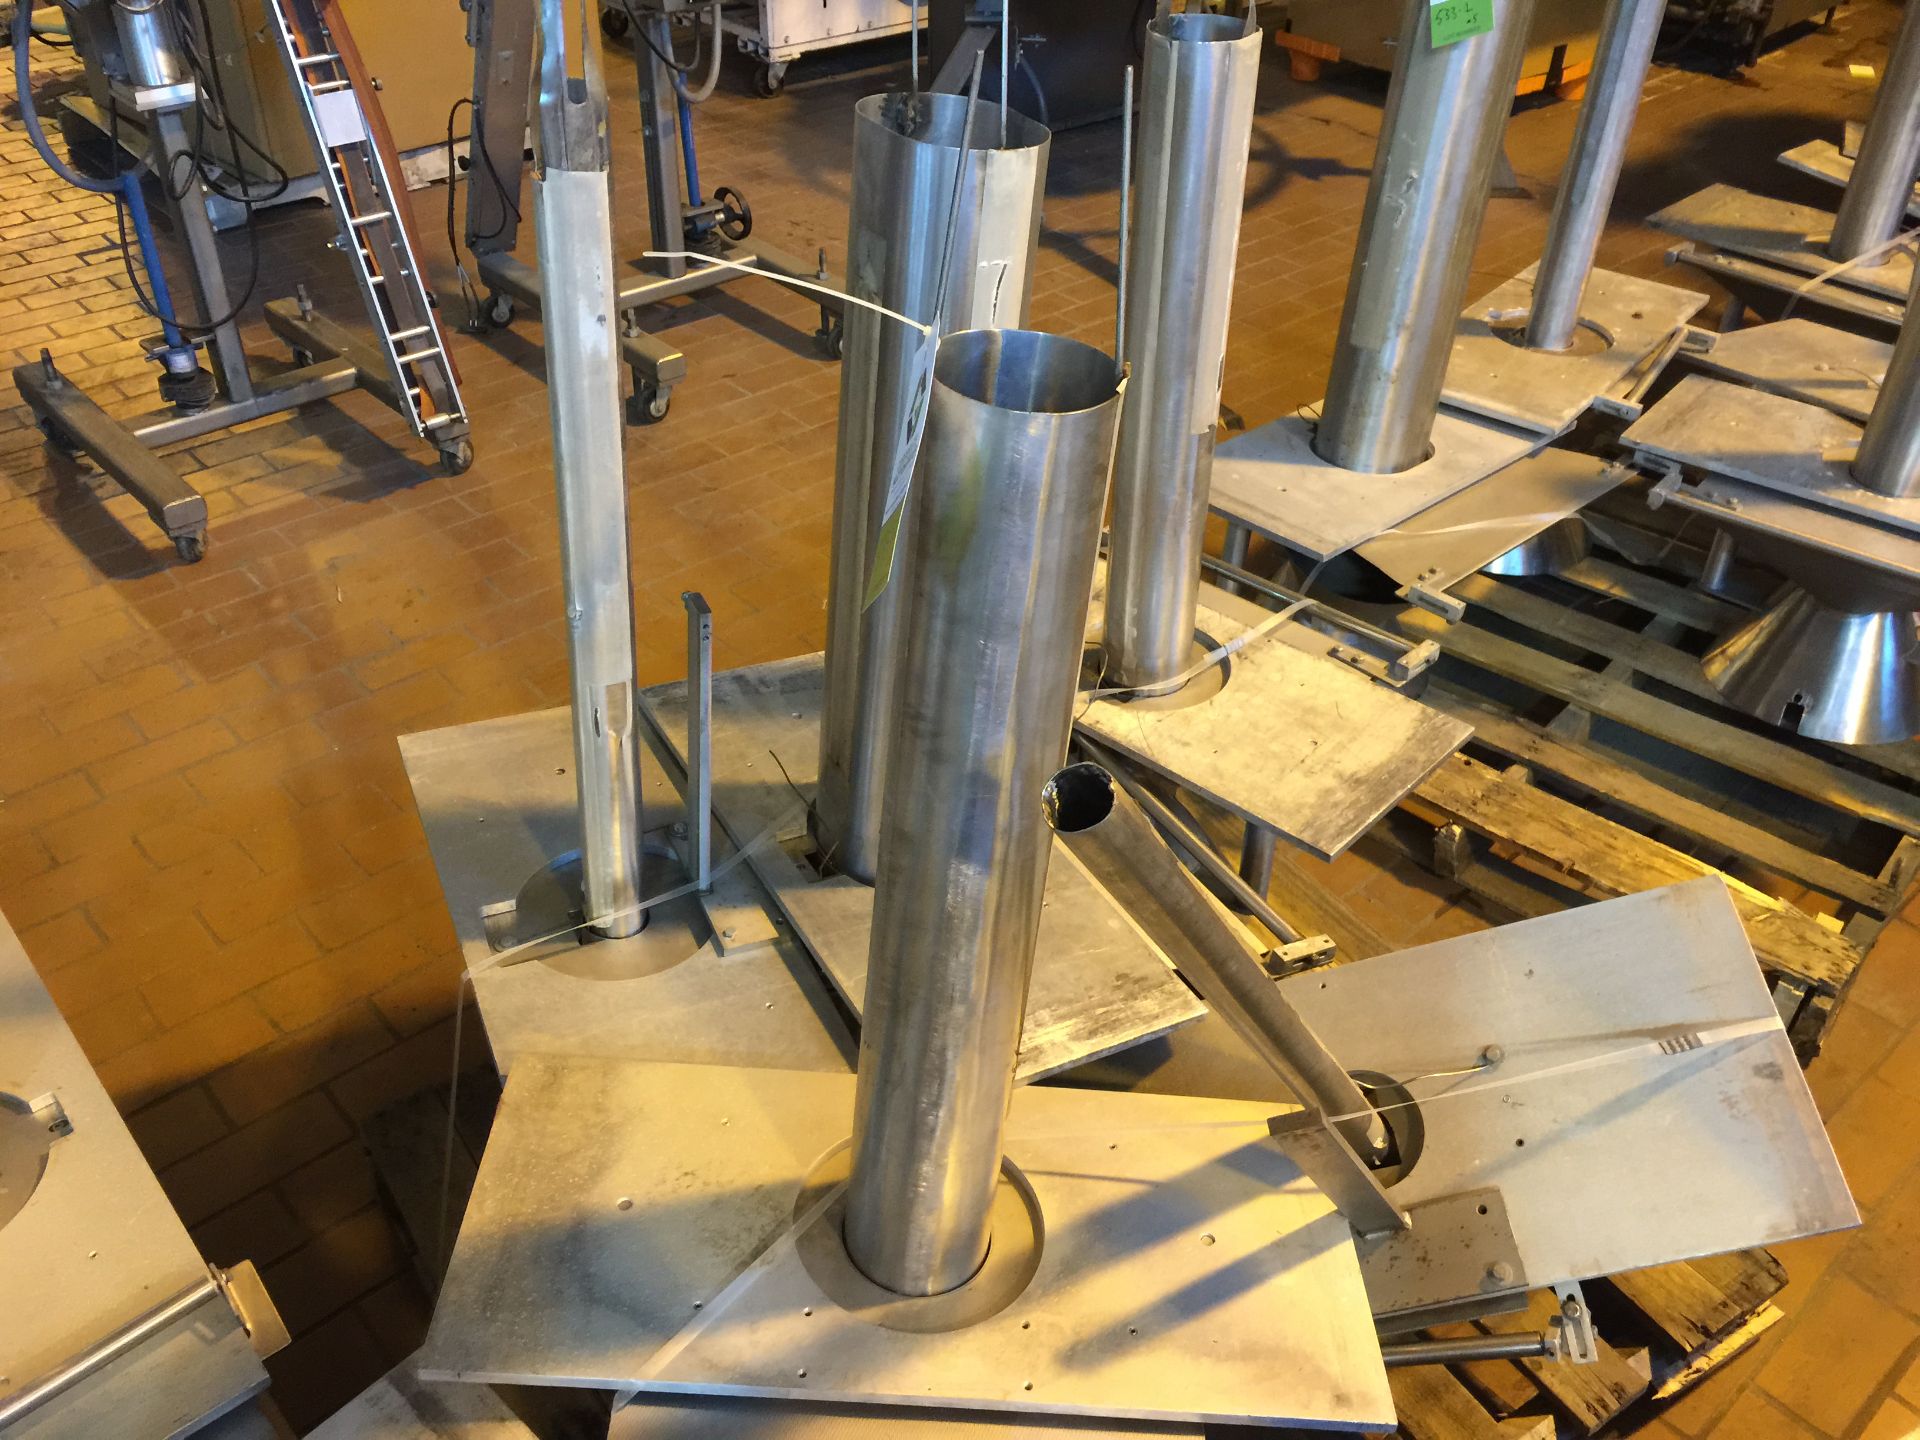 (5) SS filler/bagger forming tube (EACH) ***___ A Rigging Fee of _ $25 _ will be due the rigger